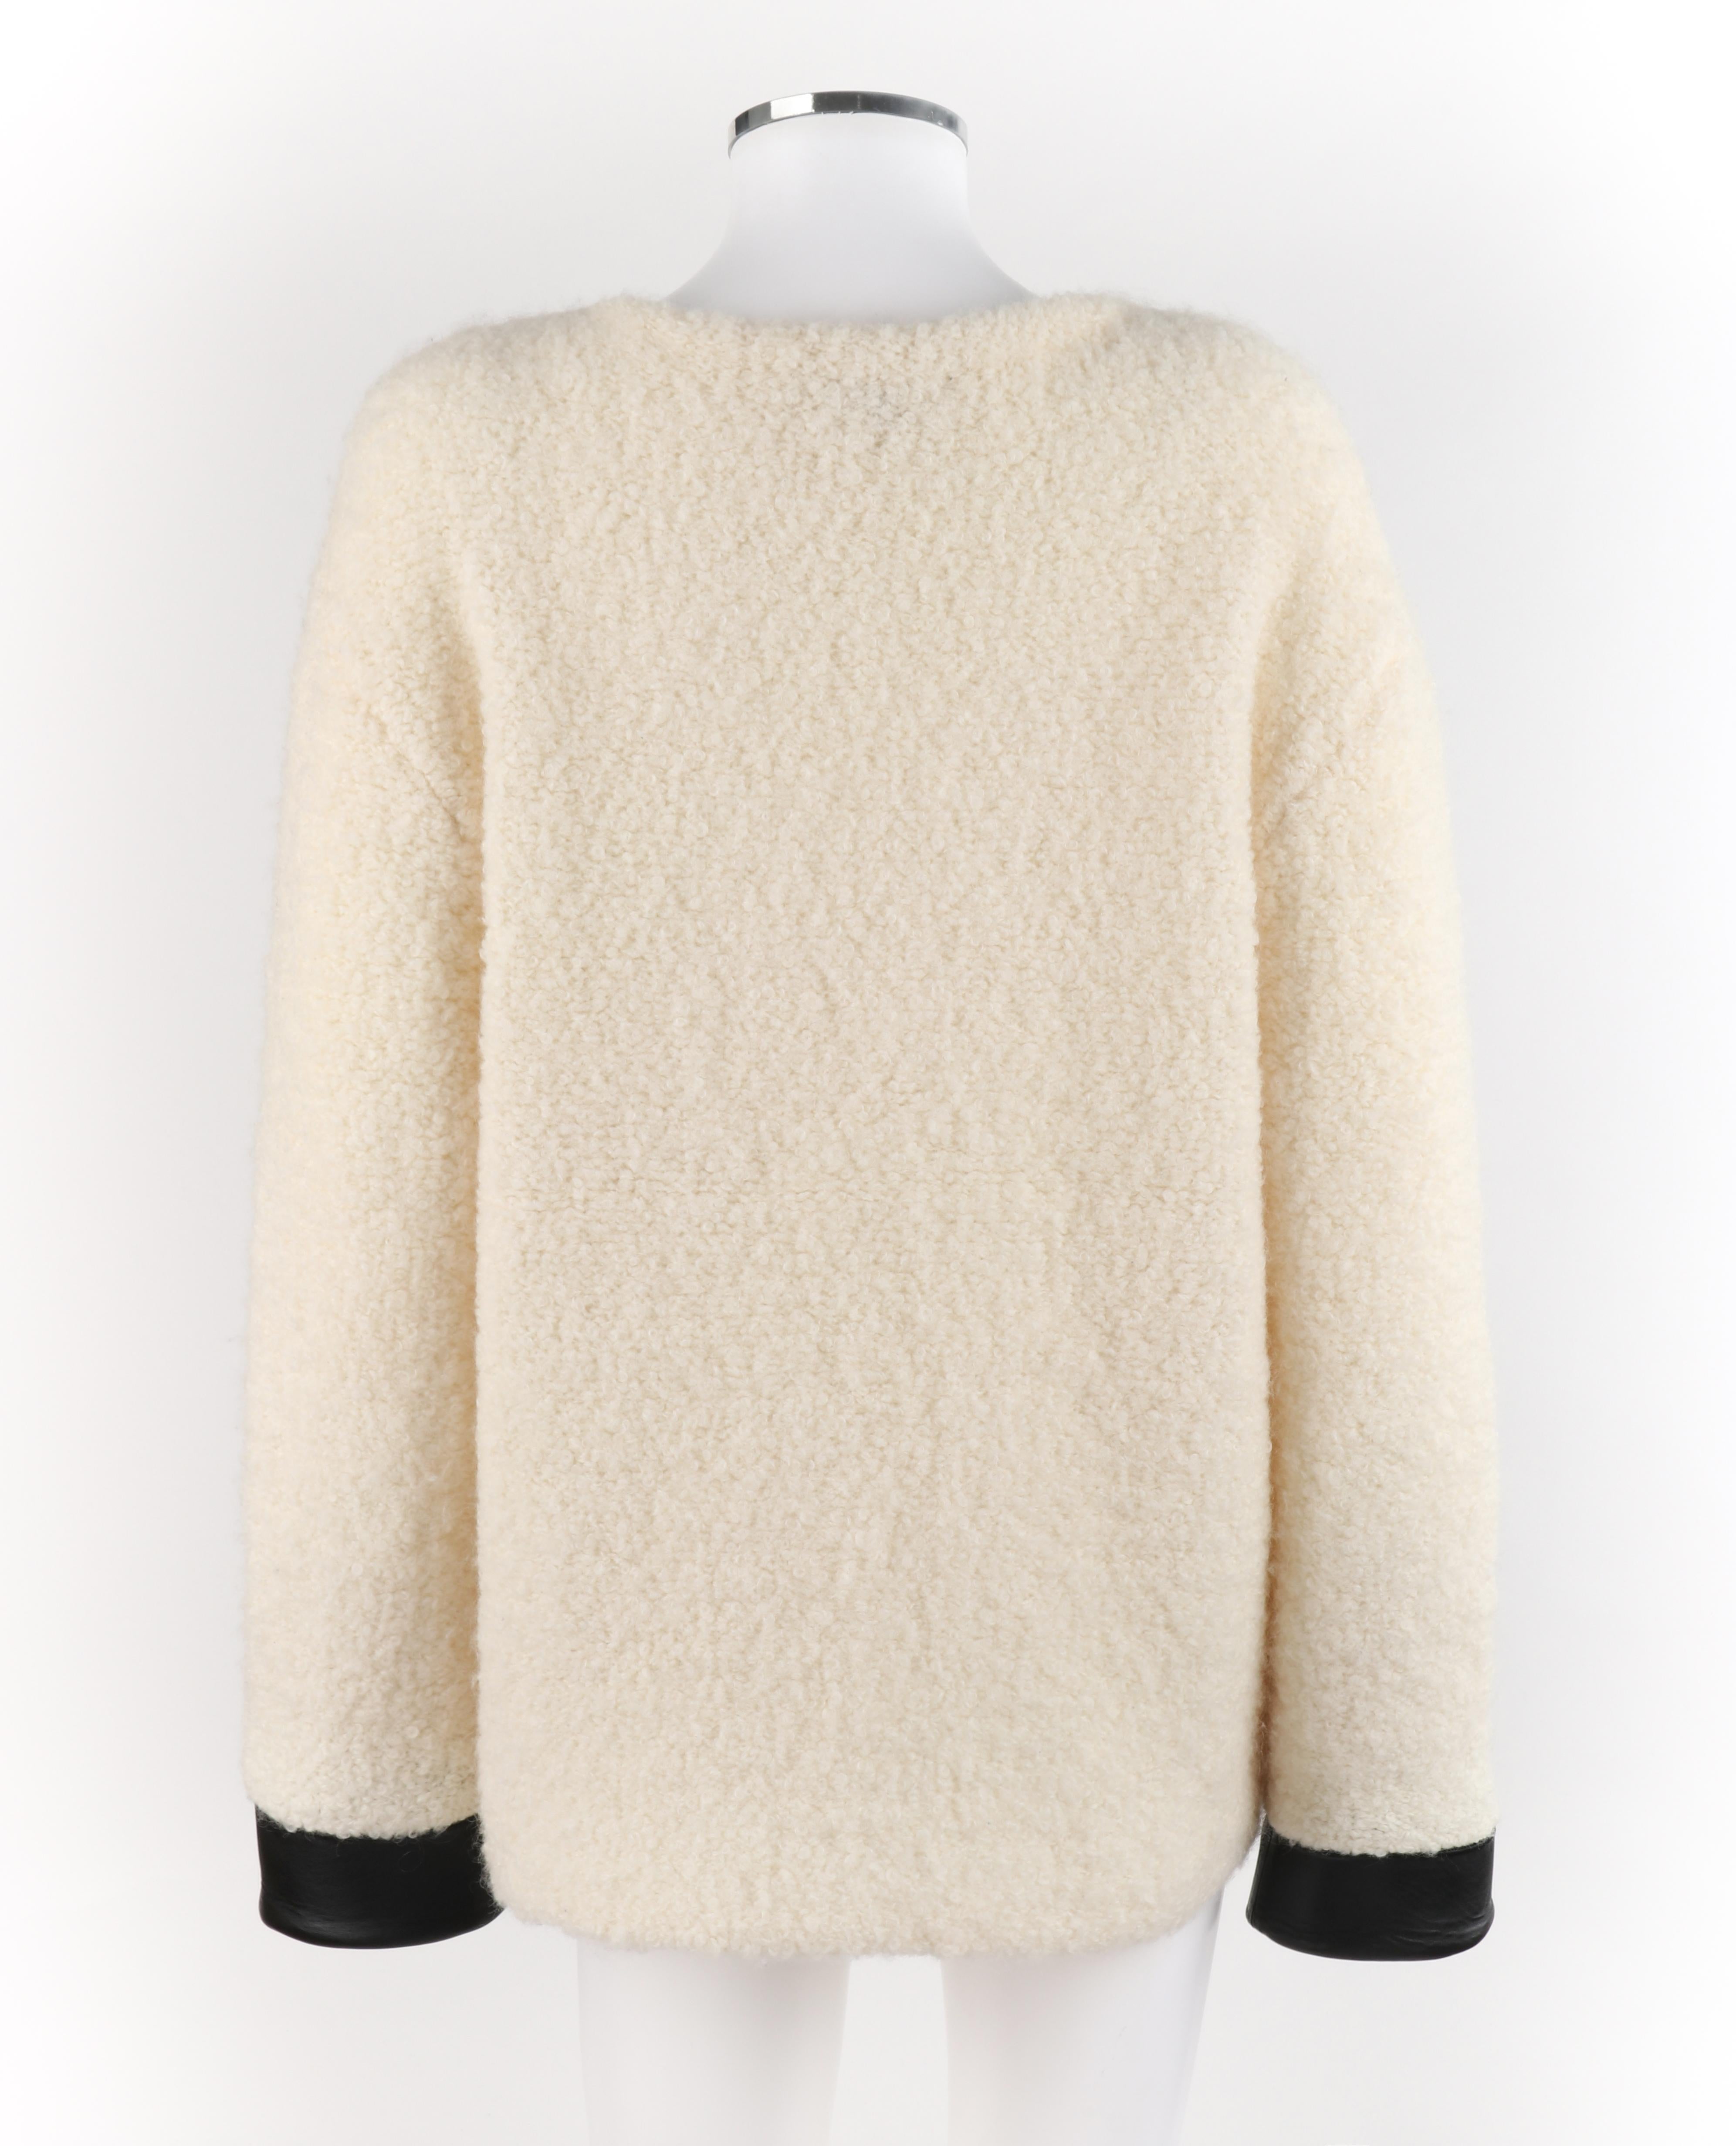 GUCCI Cream Boucle Alpaca Wool Knit Leather Cuffs Oversize Pullover Sweater 3